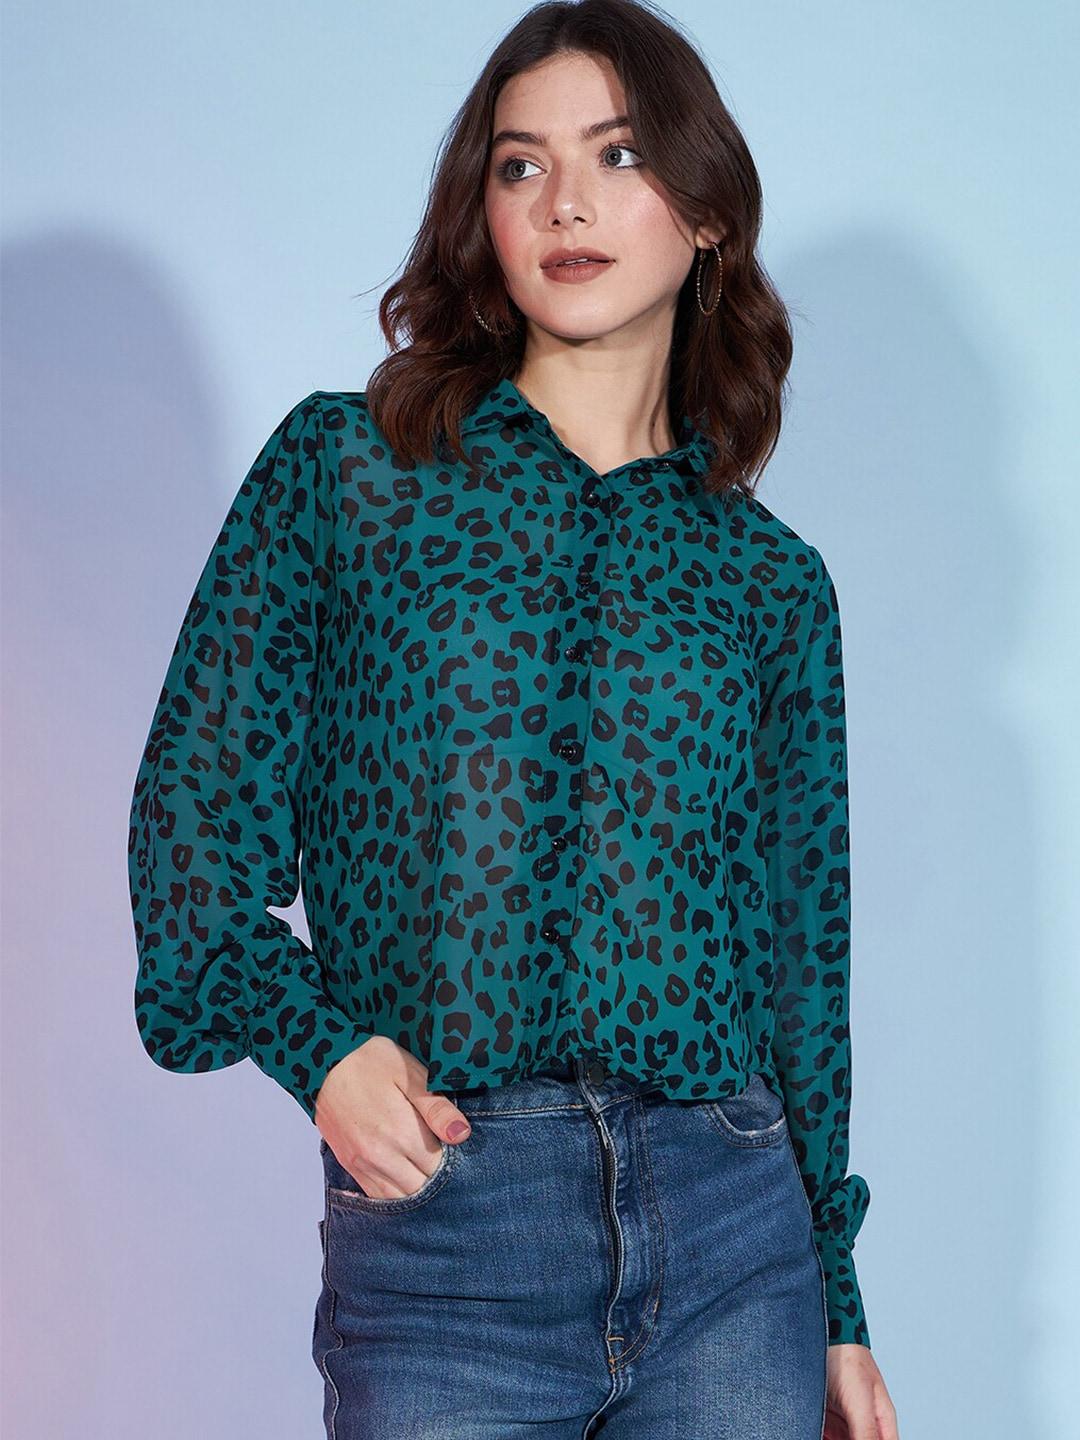 dressberry teal animal print georgette shirt style top